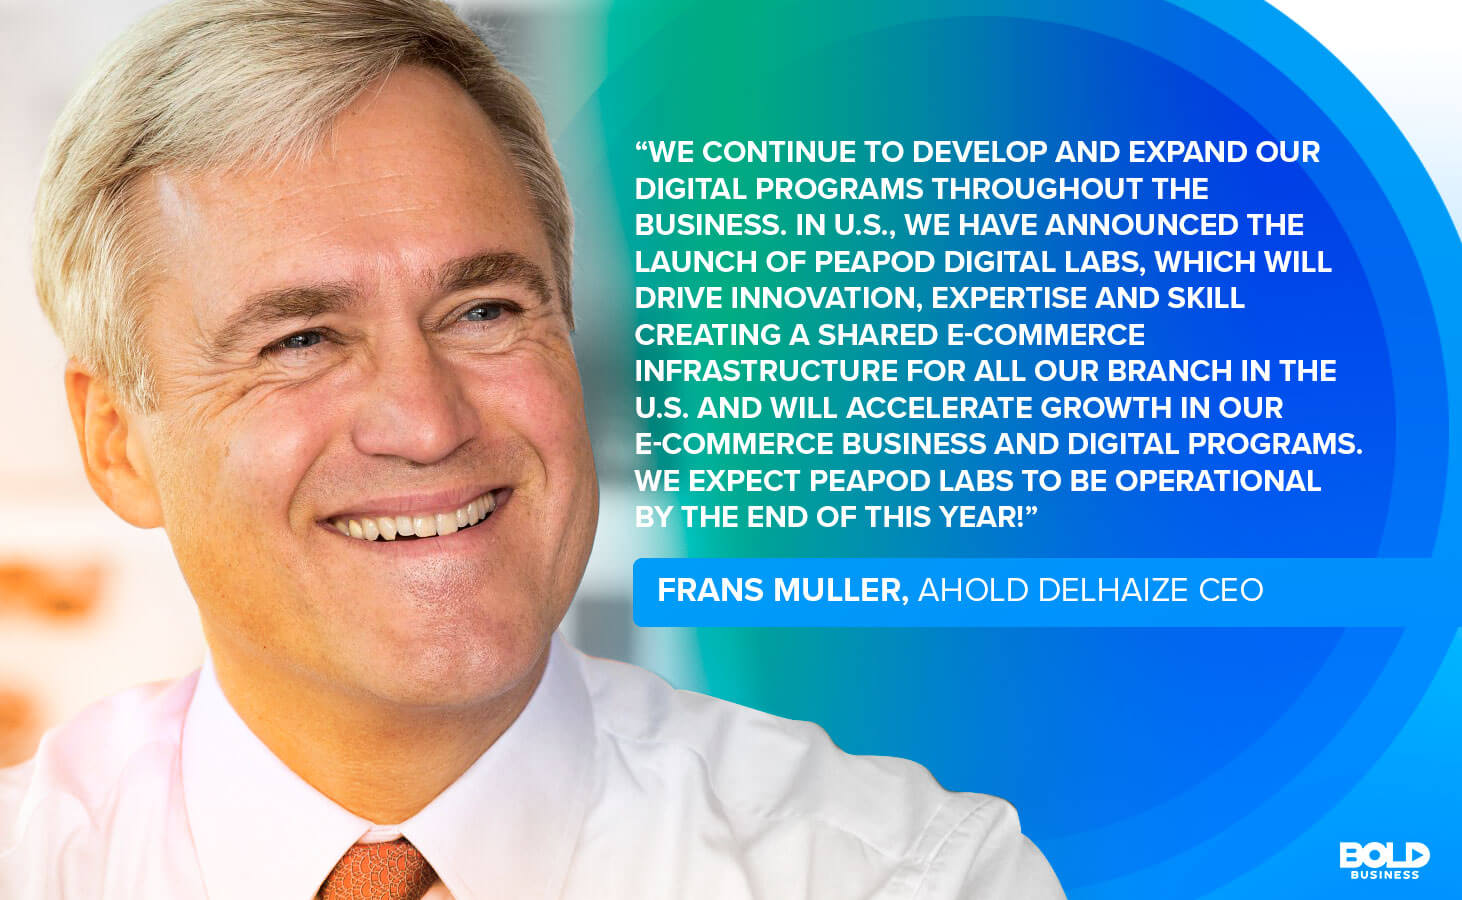 Ahold Delhaize CEO Frans Muller Discussing Peapod Grocery Digital Labs